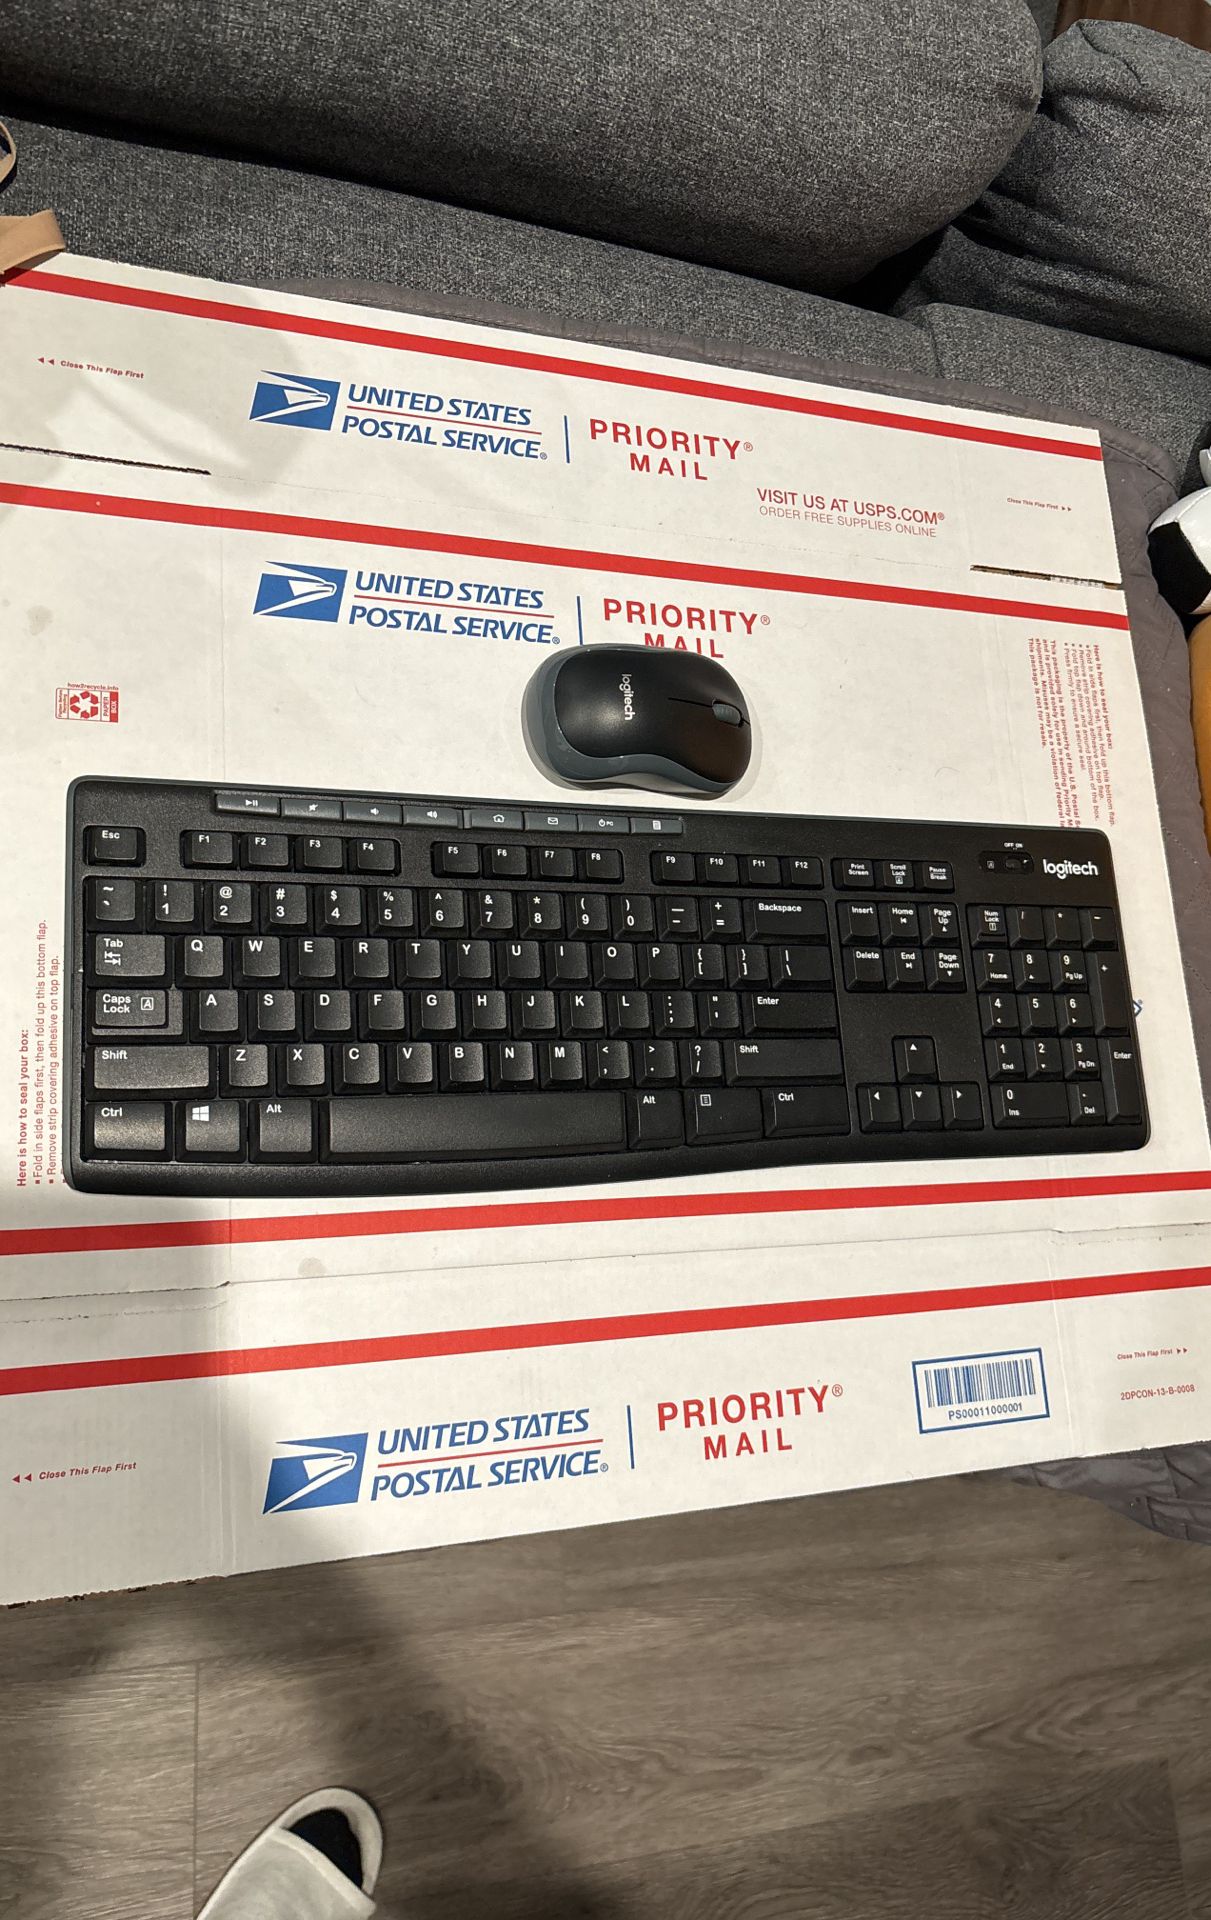 Logitech K270 Keyboard & M185 Mouse Combo Good Condition 